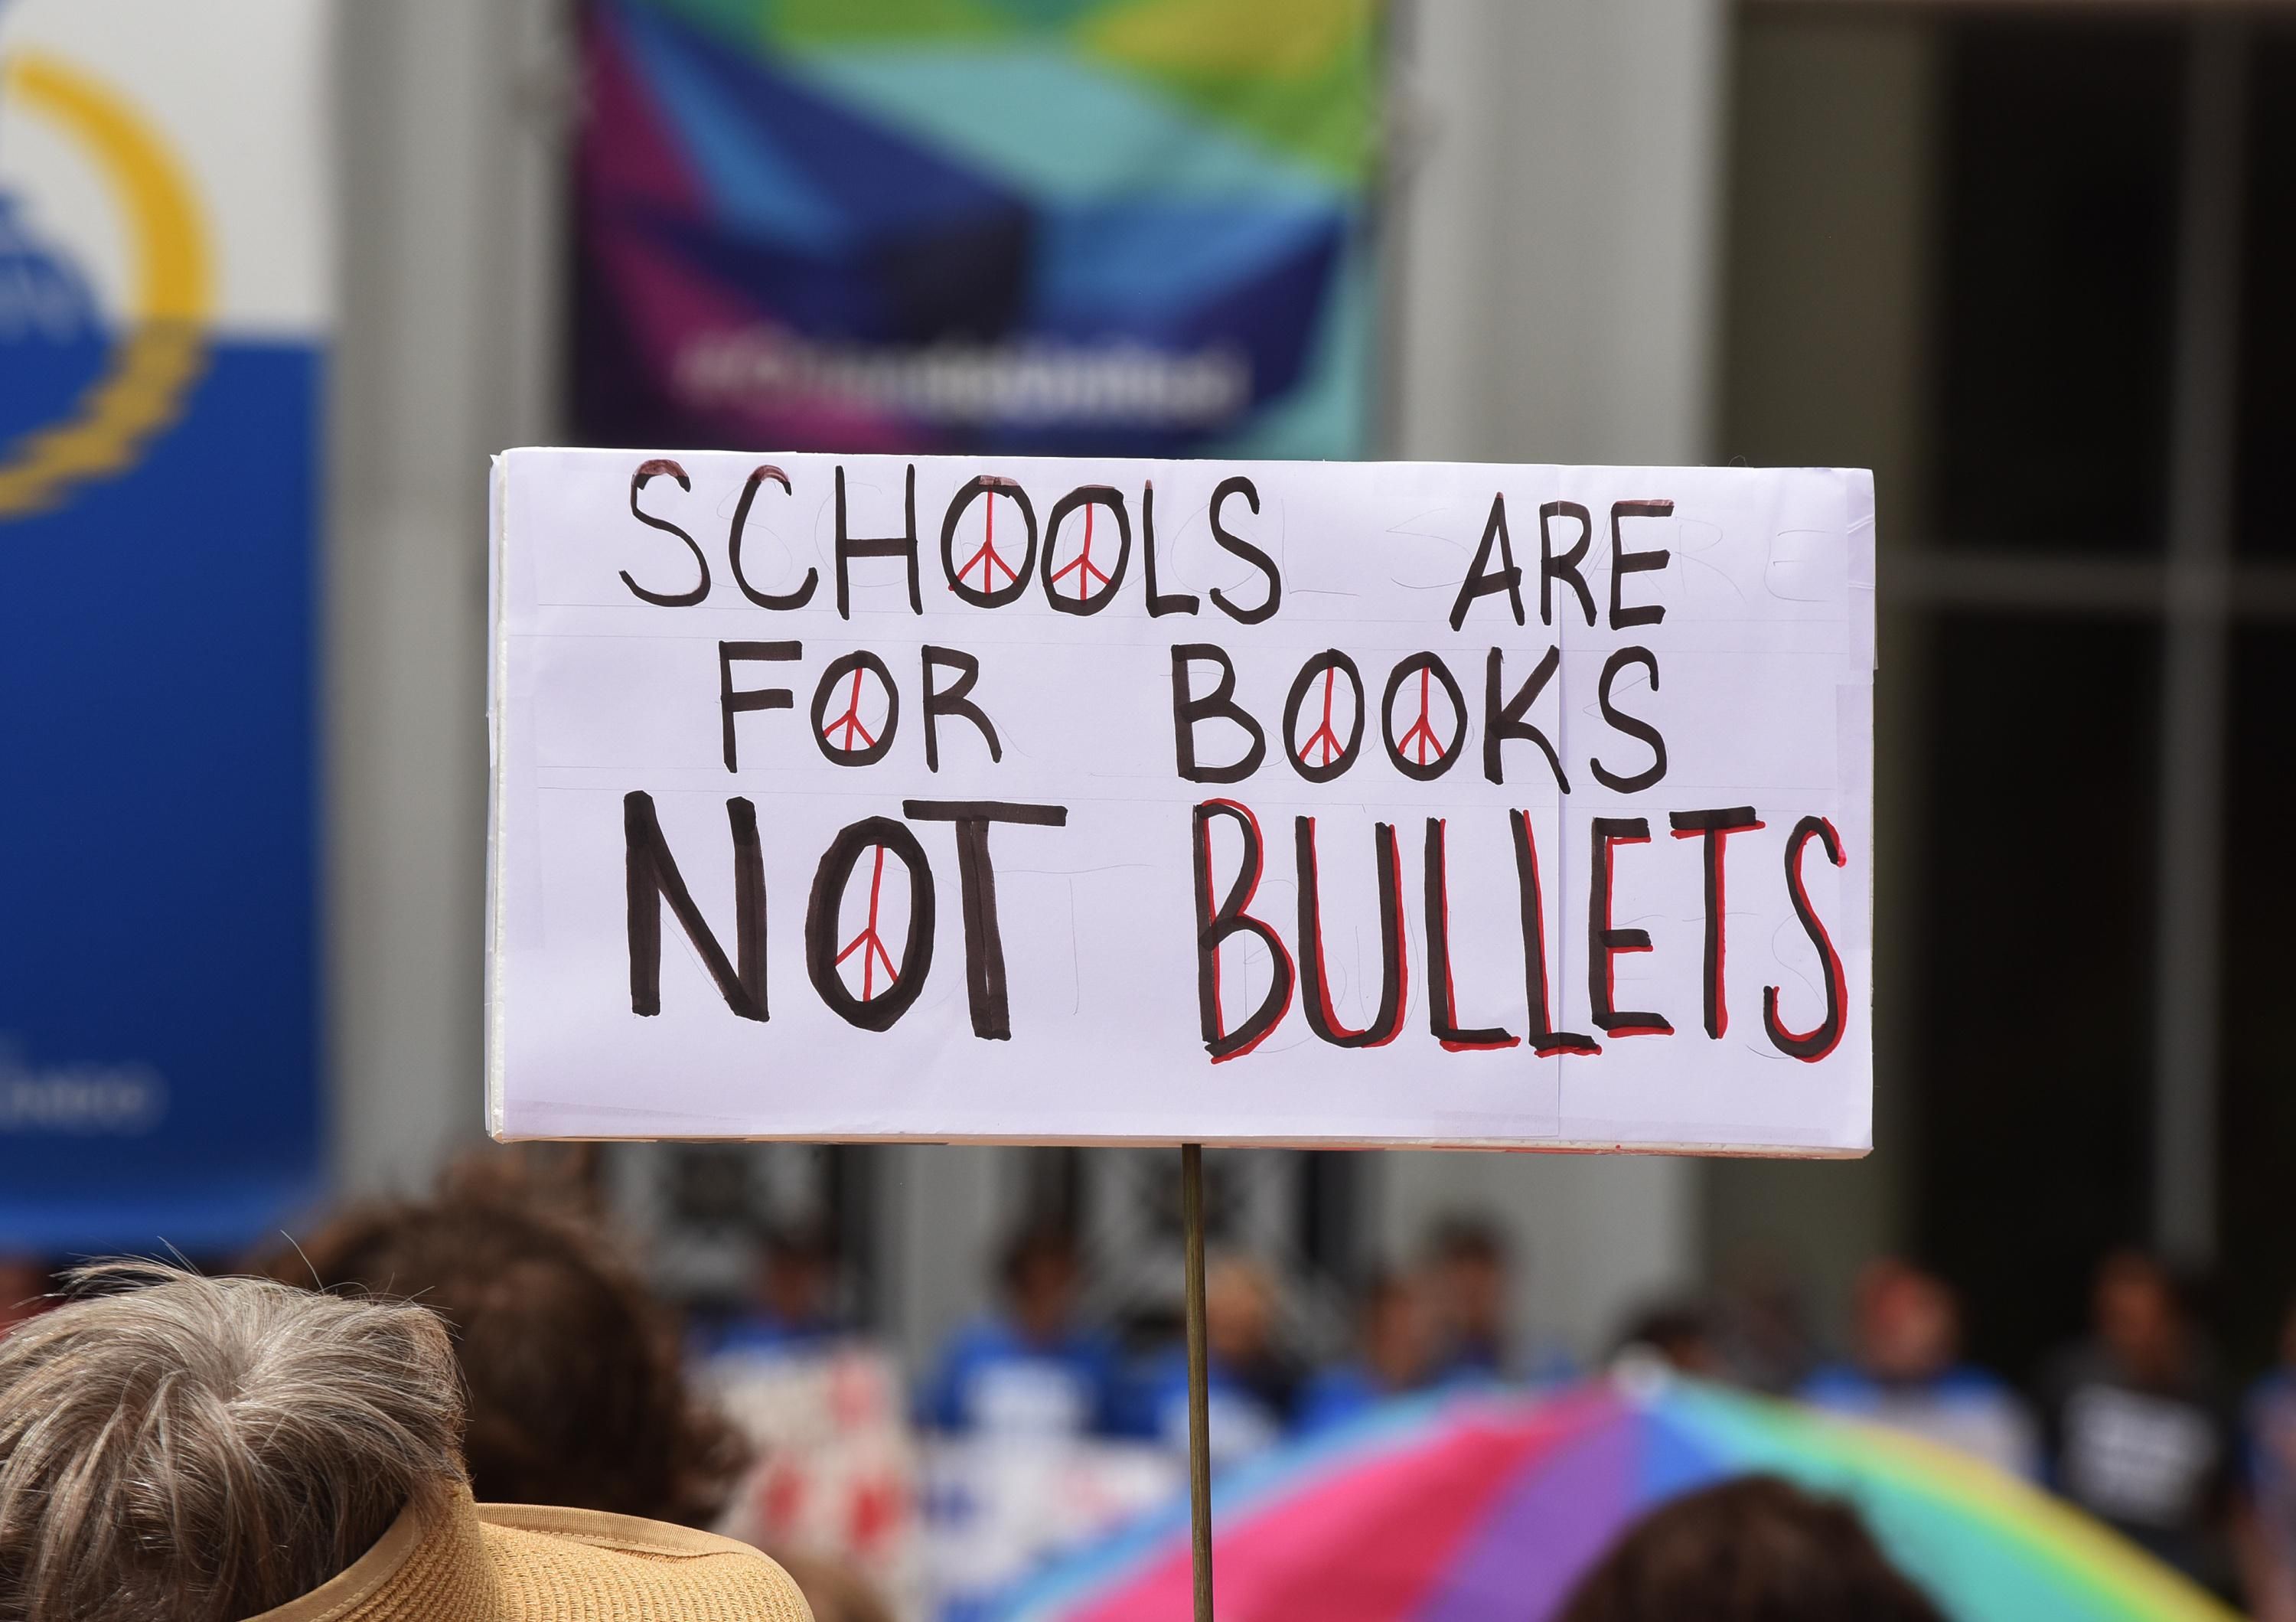 "Schools are for books, not bullets" sign at protest